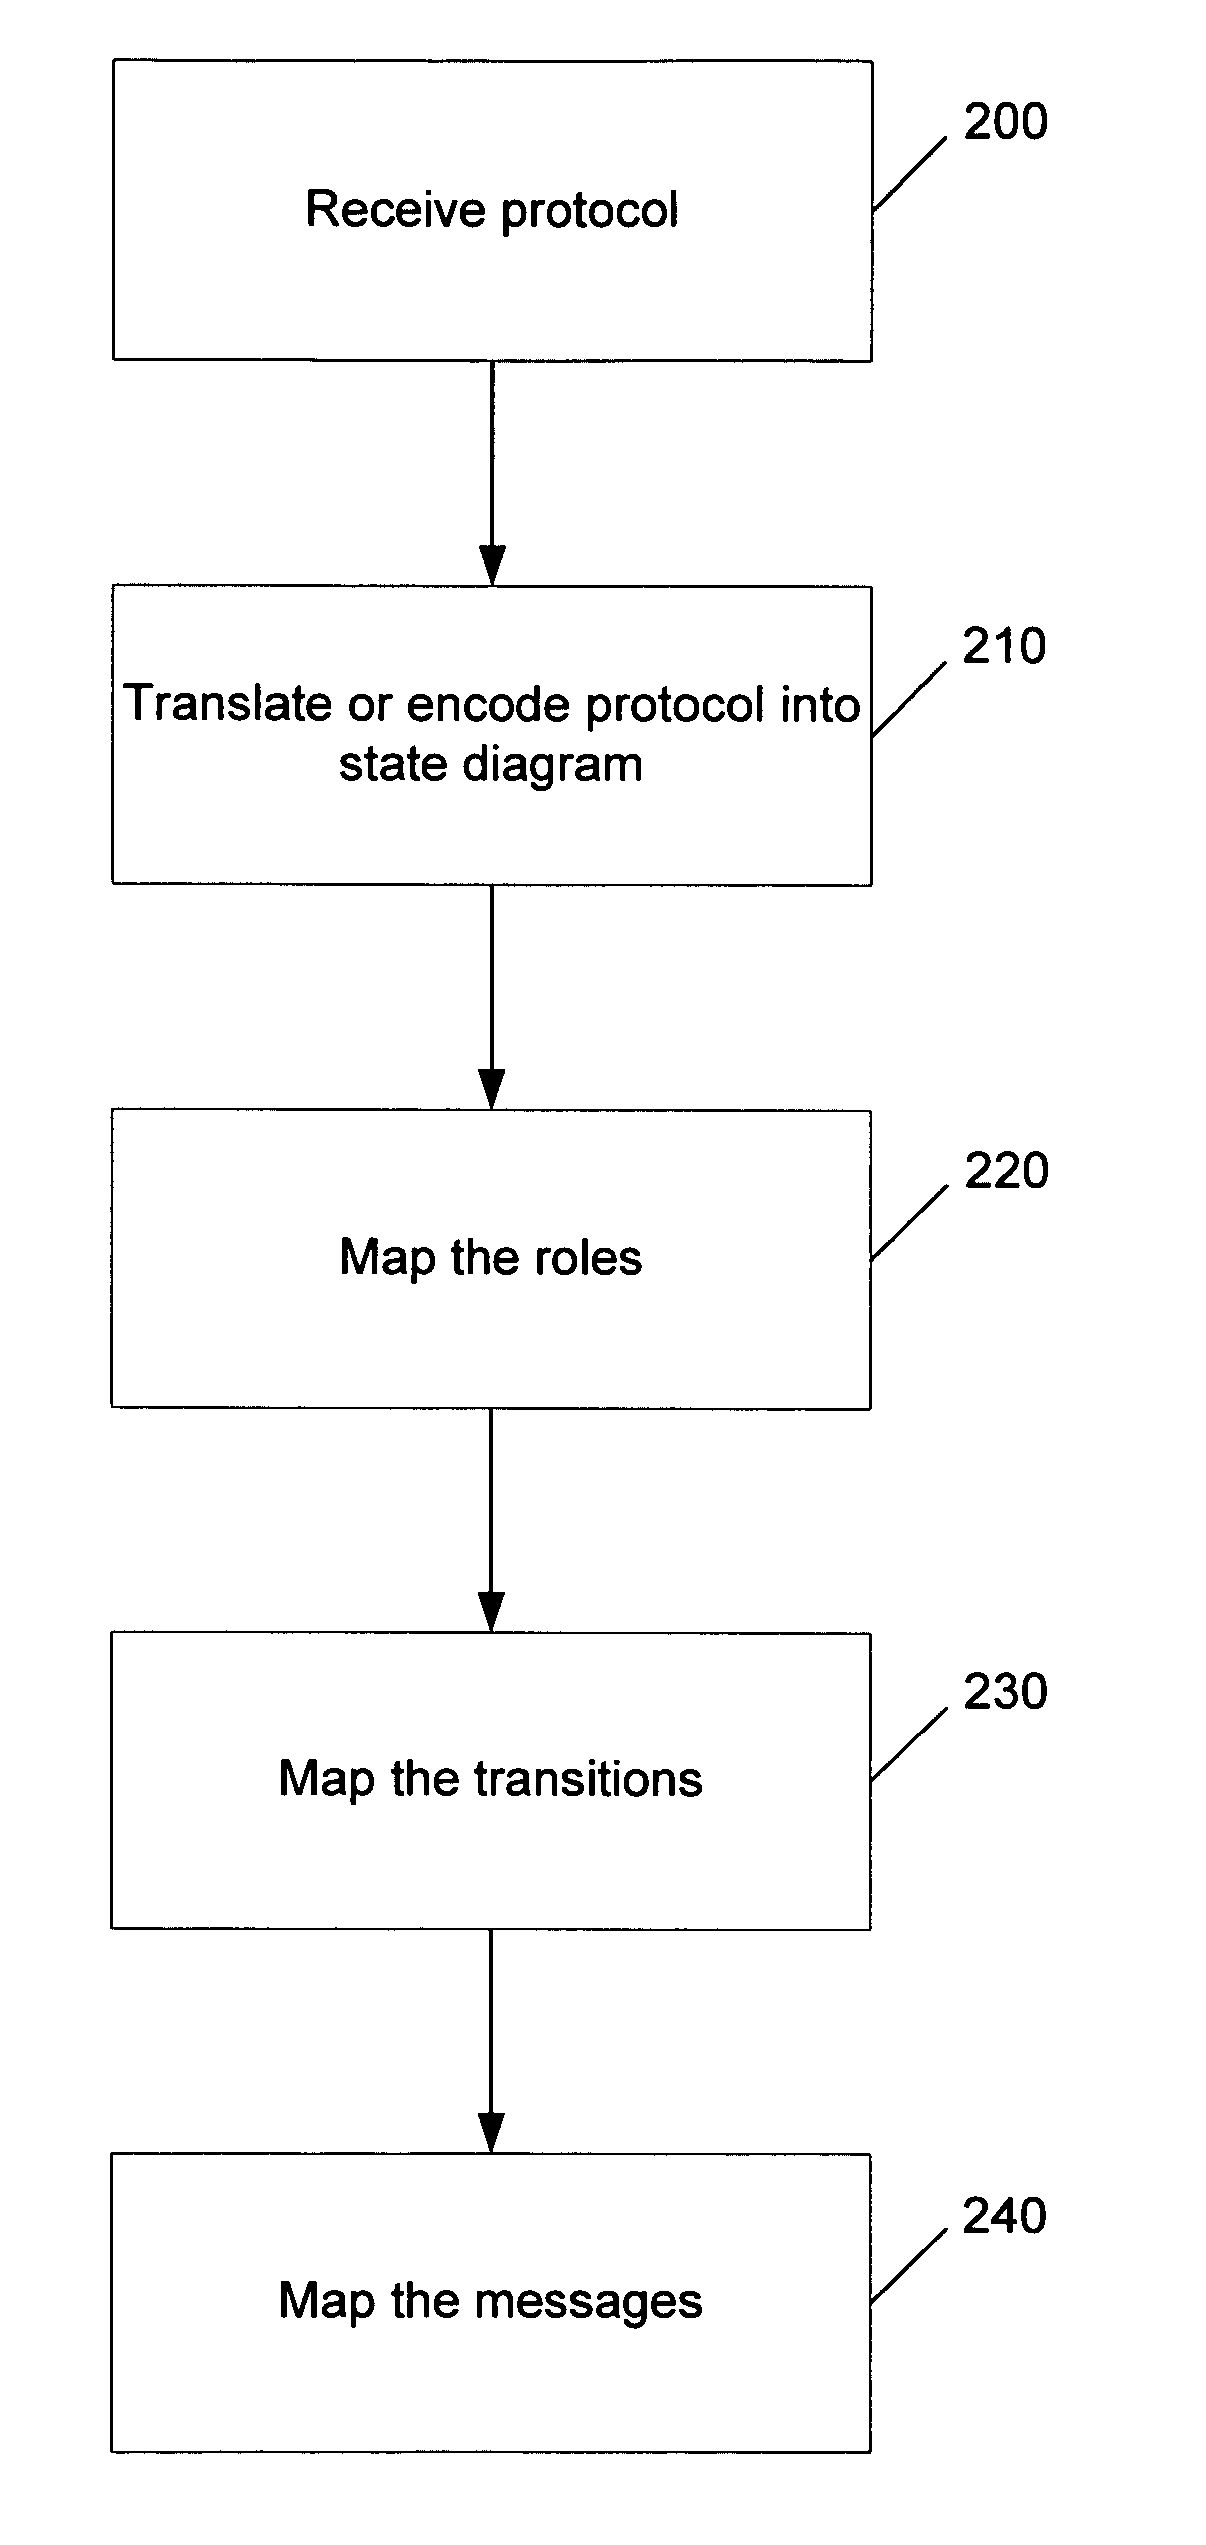 Generalized protocol mapping